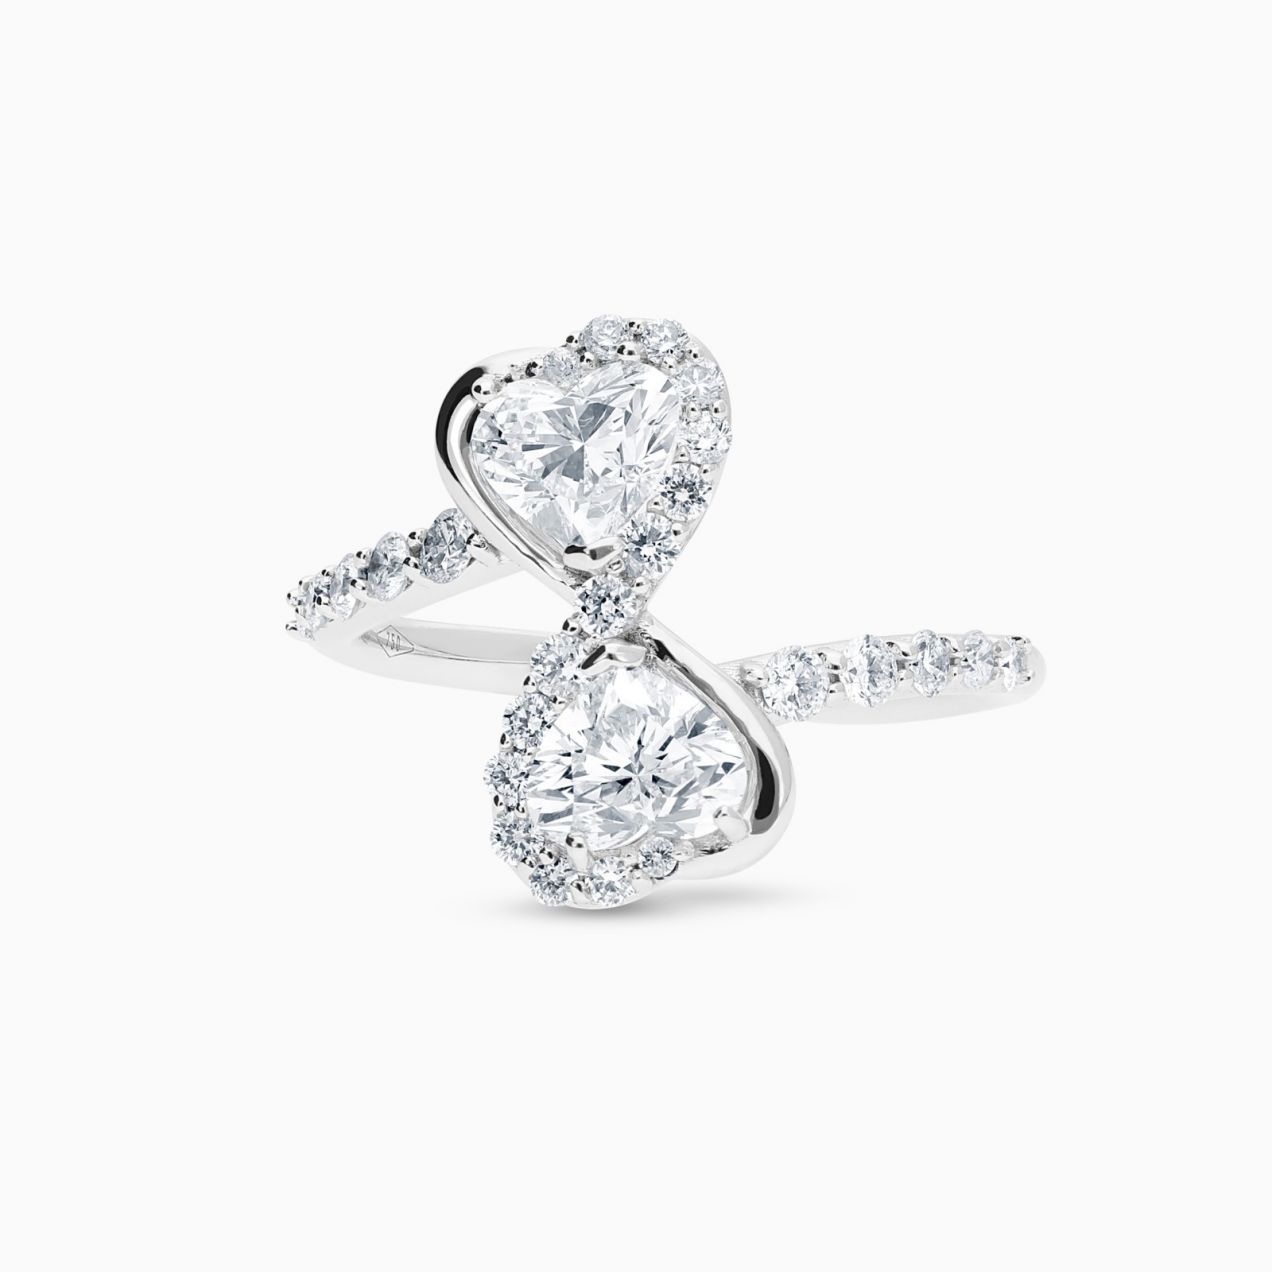 Infinity symbol ring in white gold with heart-cut diamonds and diamonds